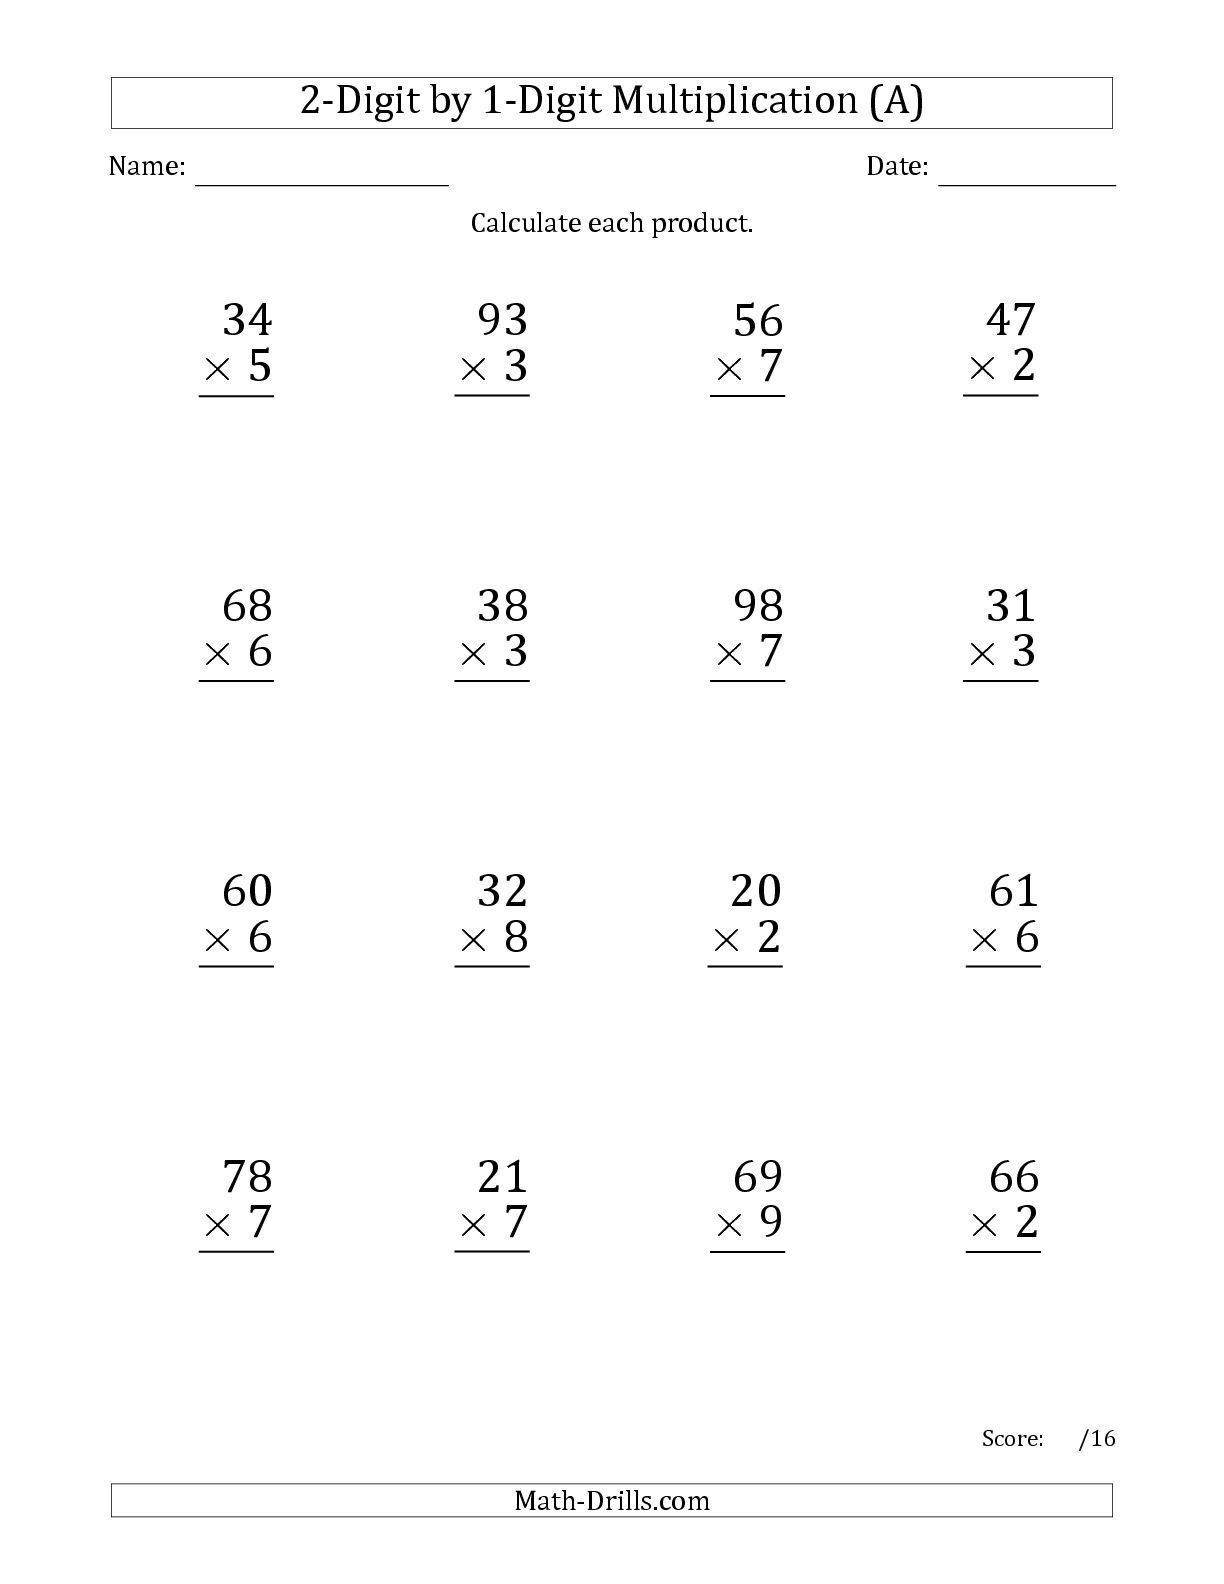 2 Digit By 1 Digit Multiplication Problems